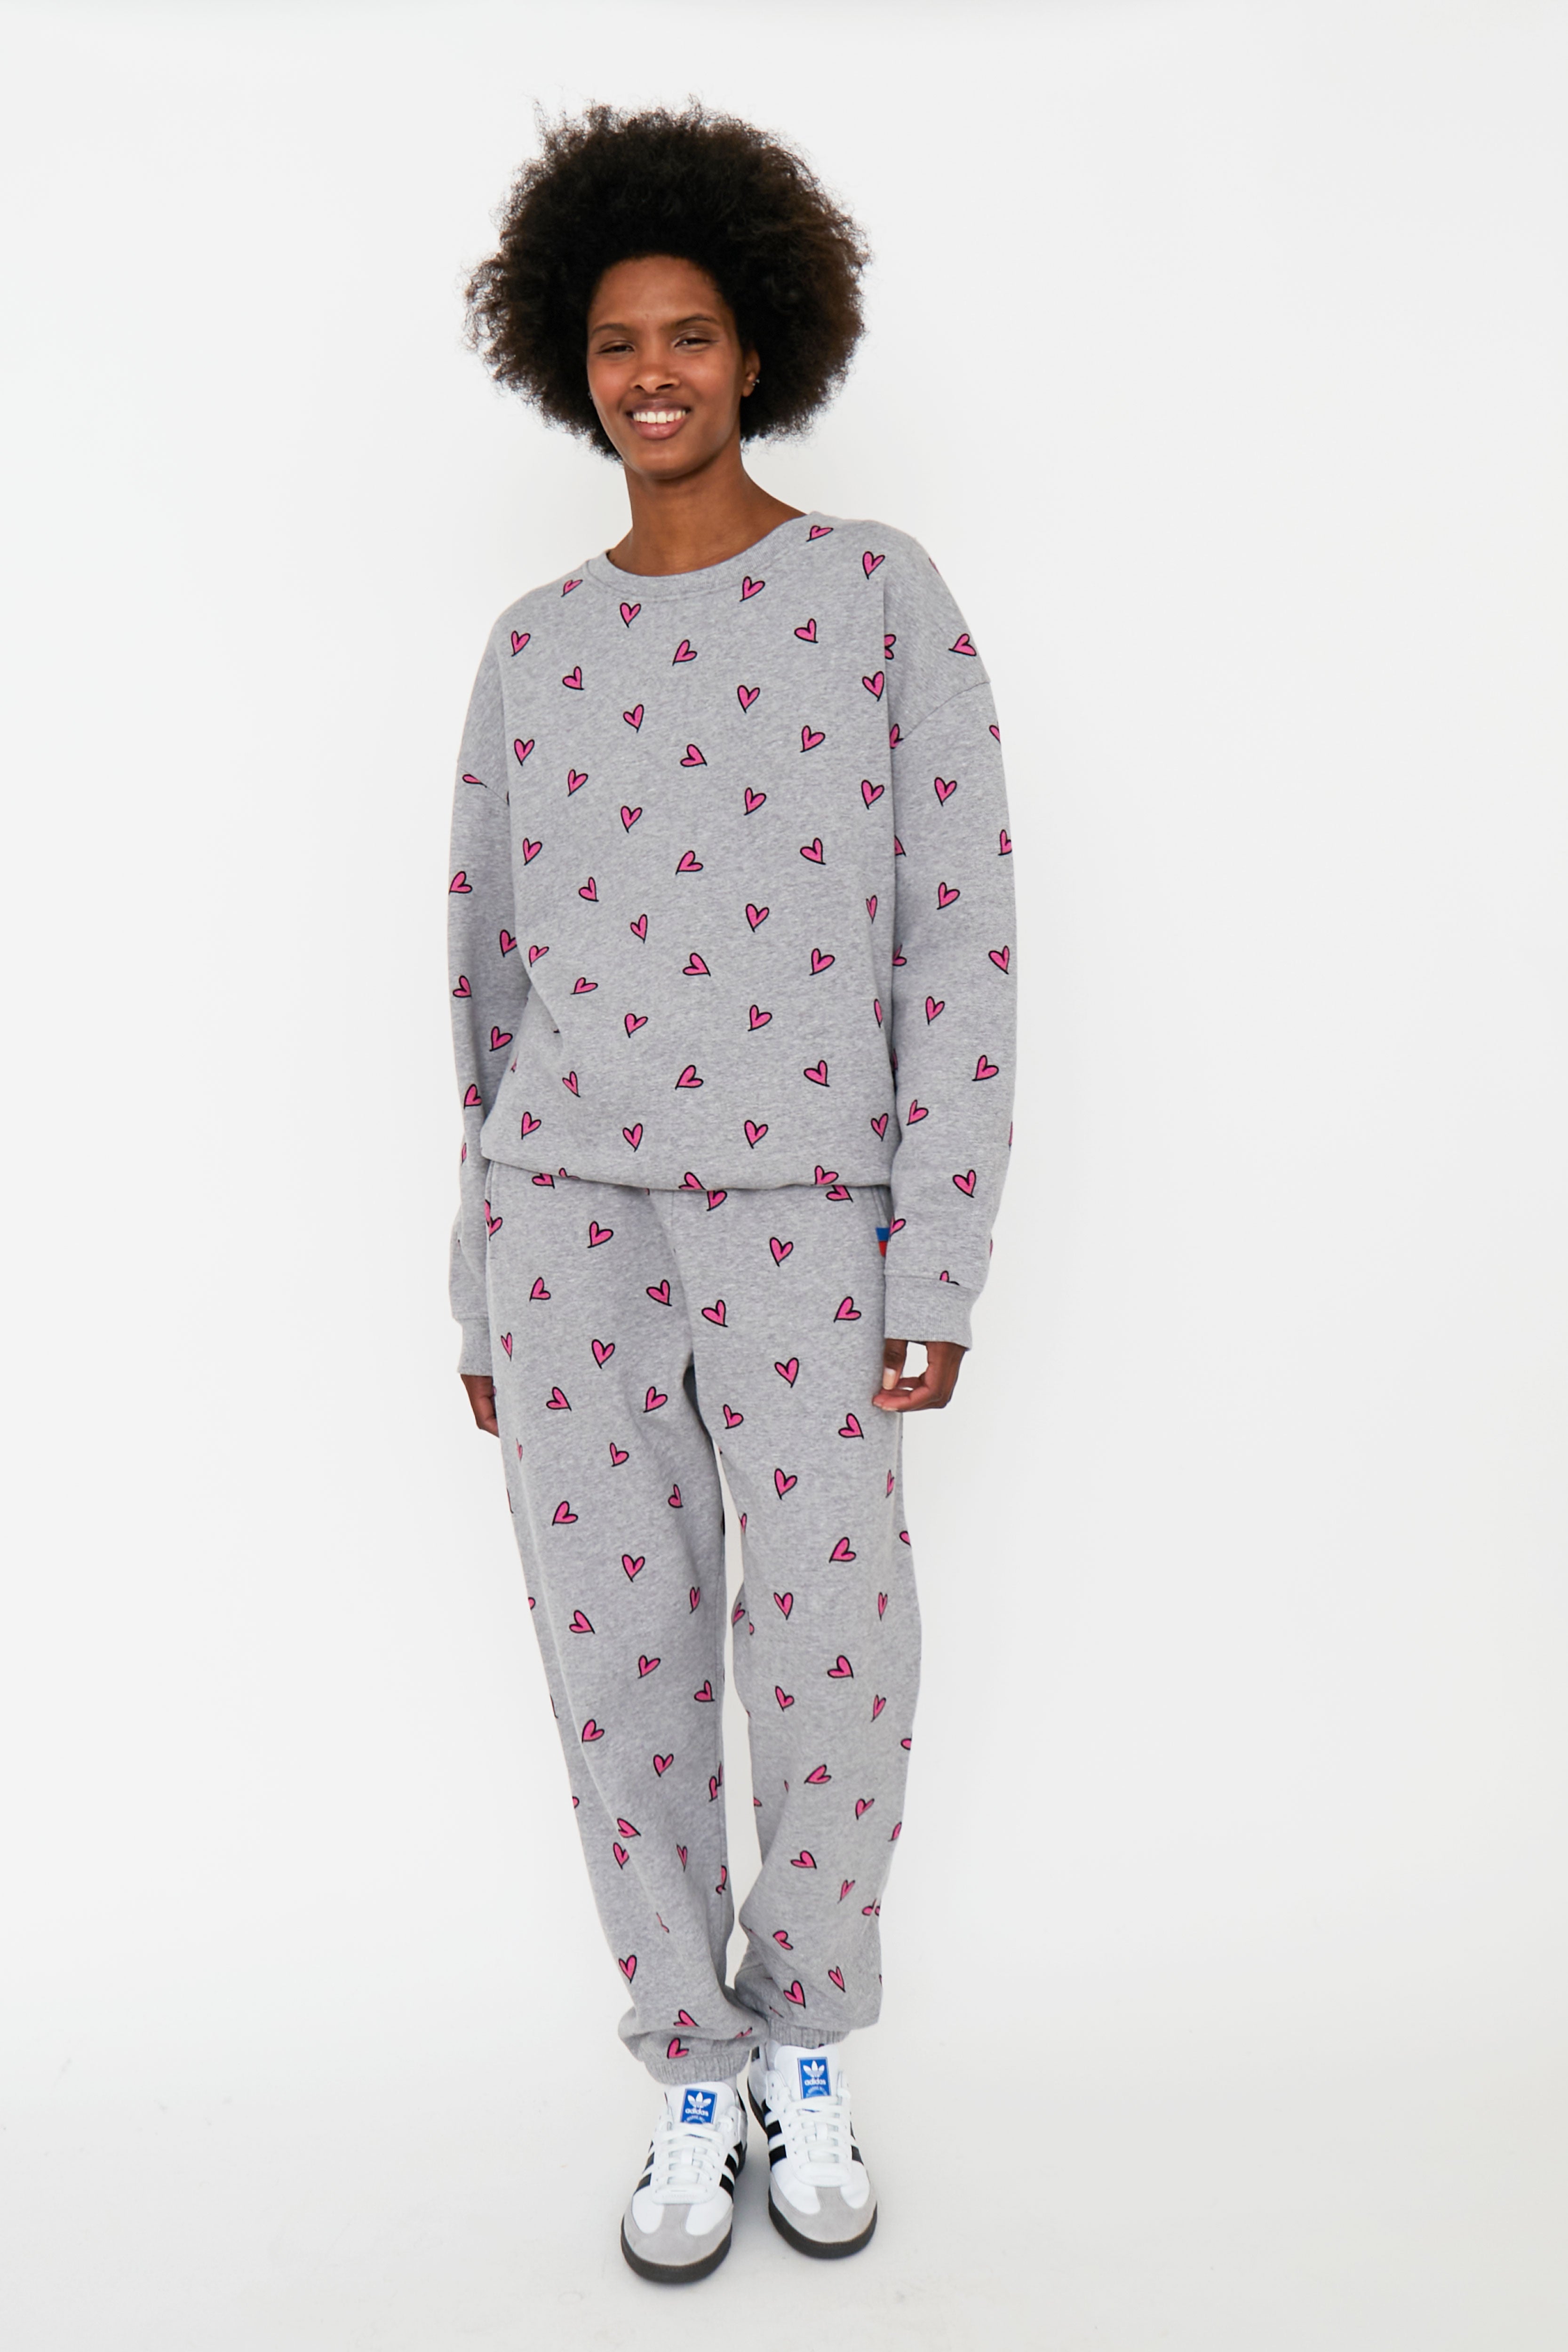 The All Over Heart Sweatpants - Heather Grey/Pink